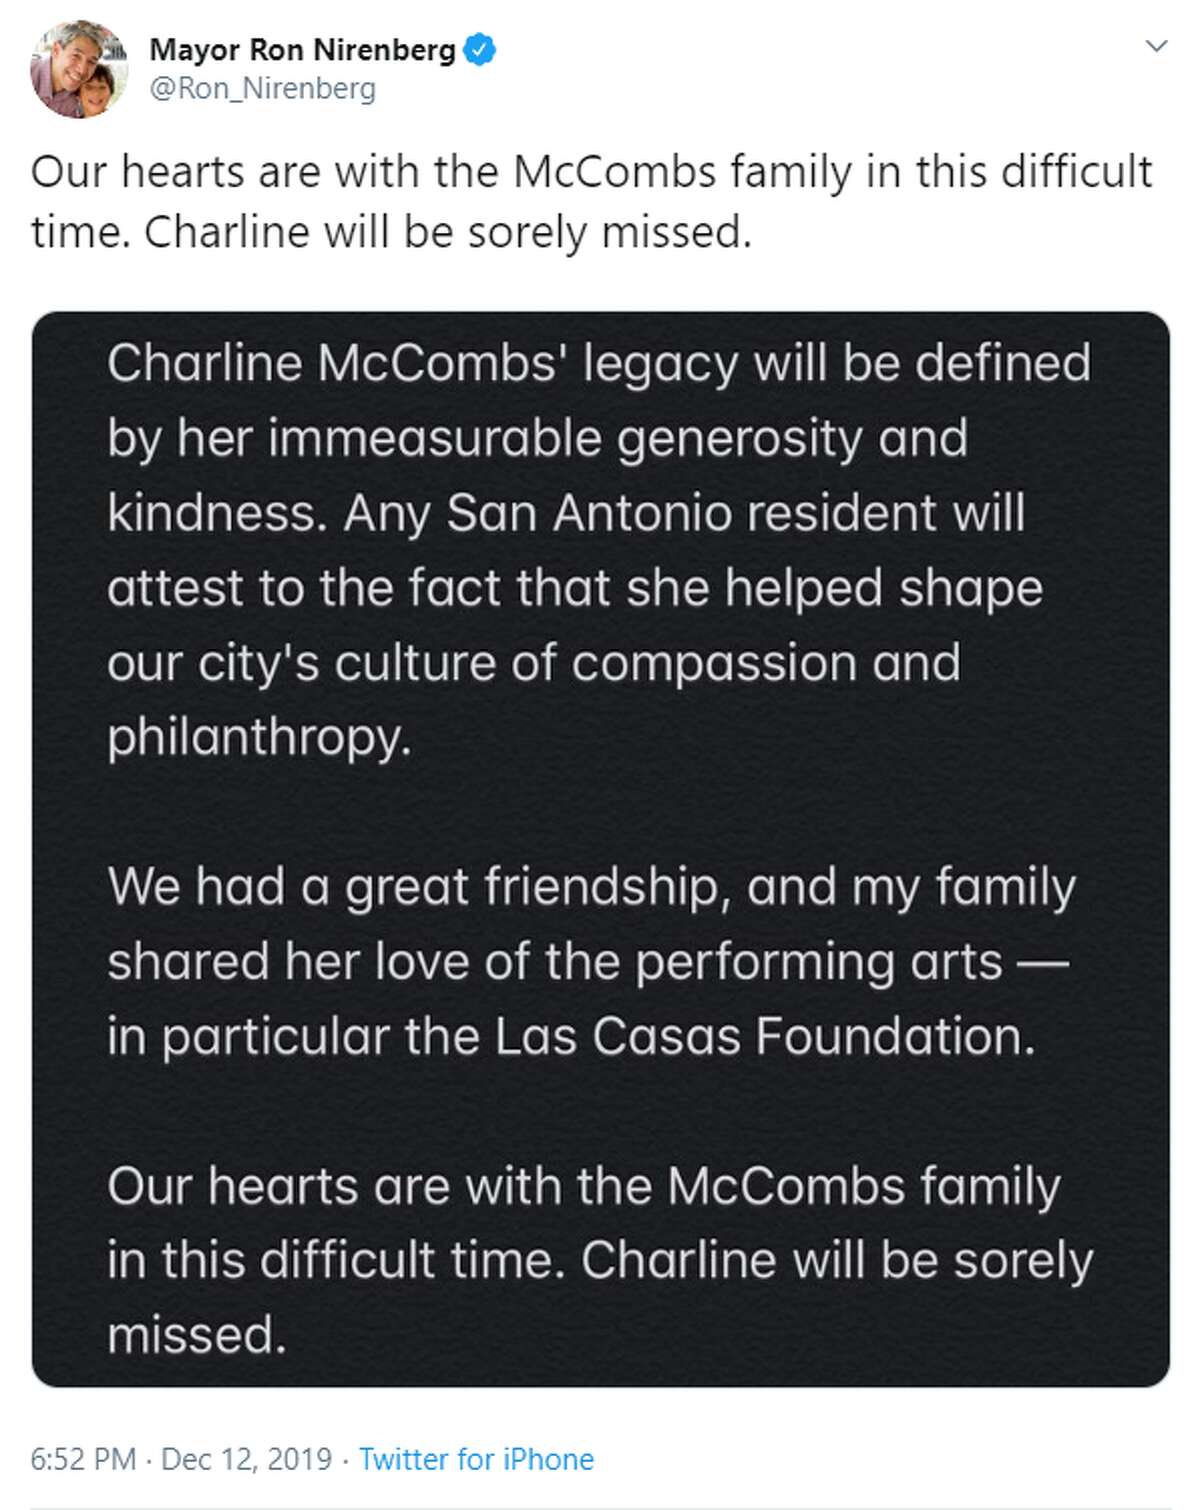 @Ron_Nirenberg: Our hearts are with the McCombs family in this difficult time. Charline will be sorely missed.